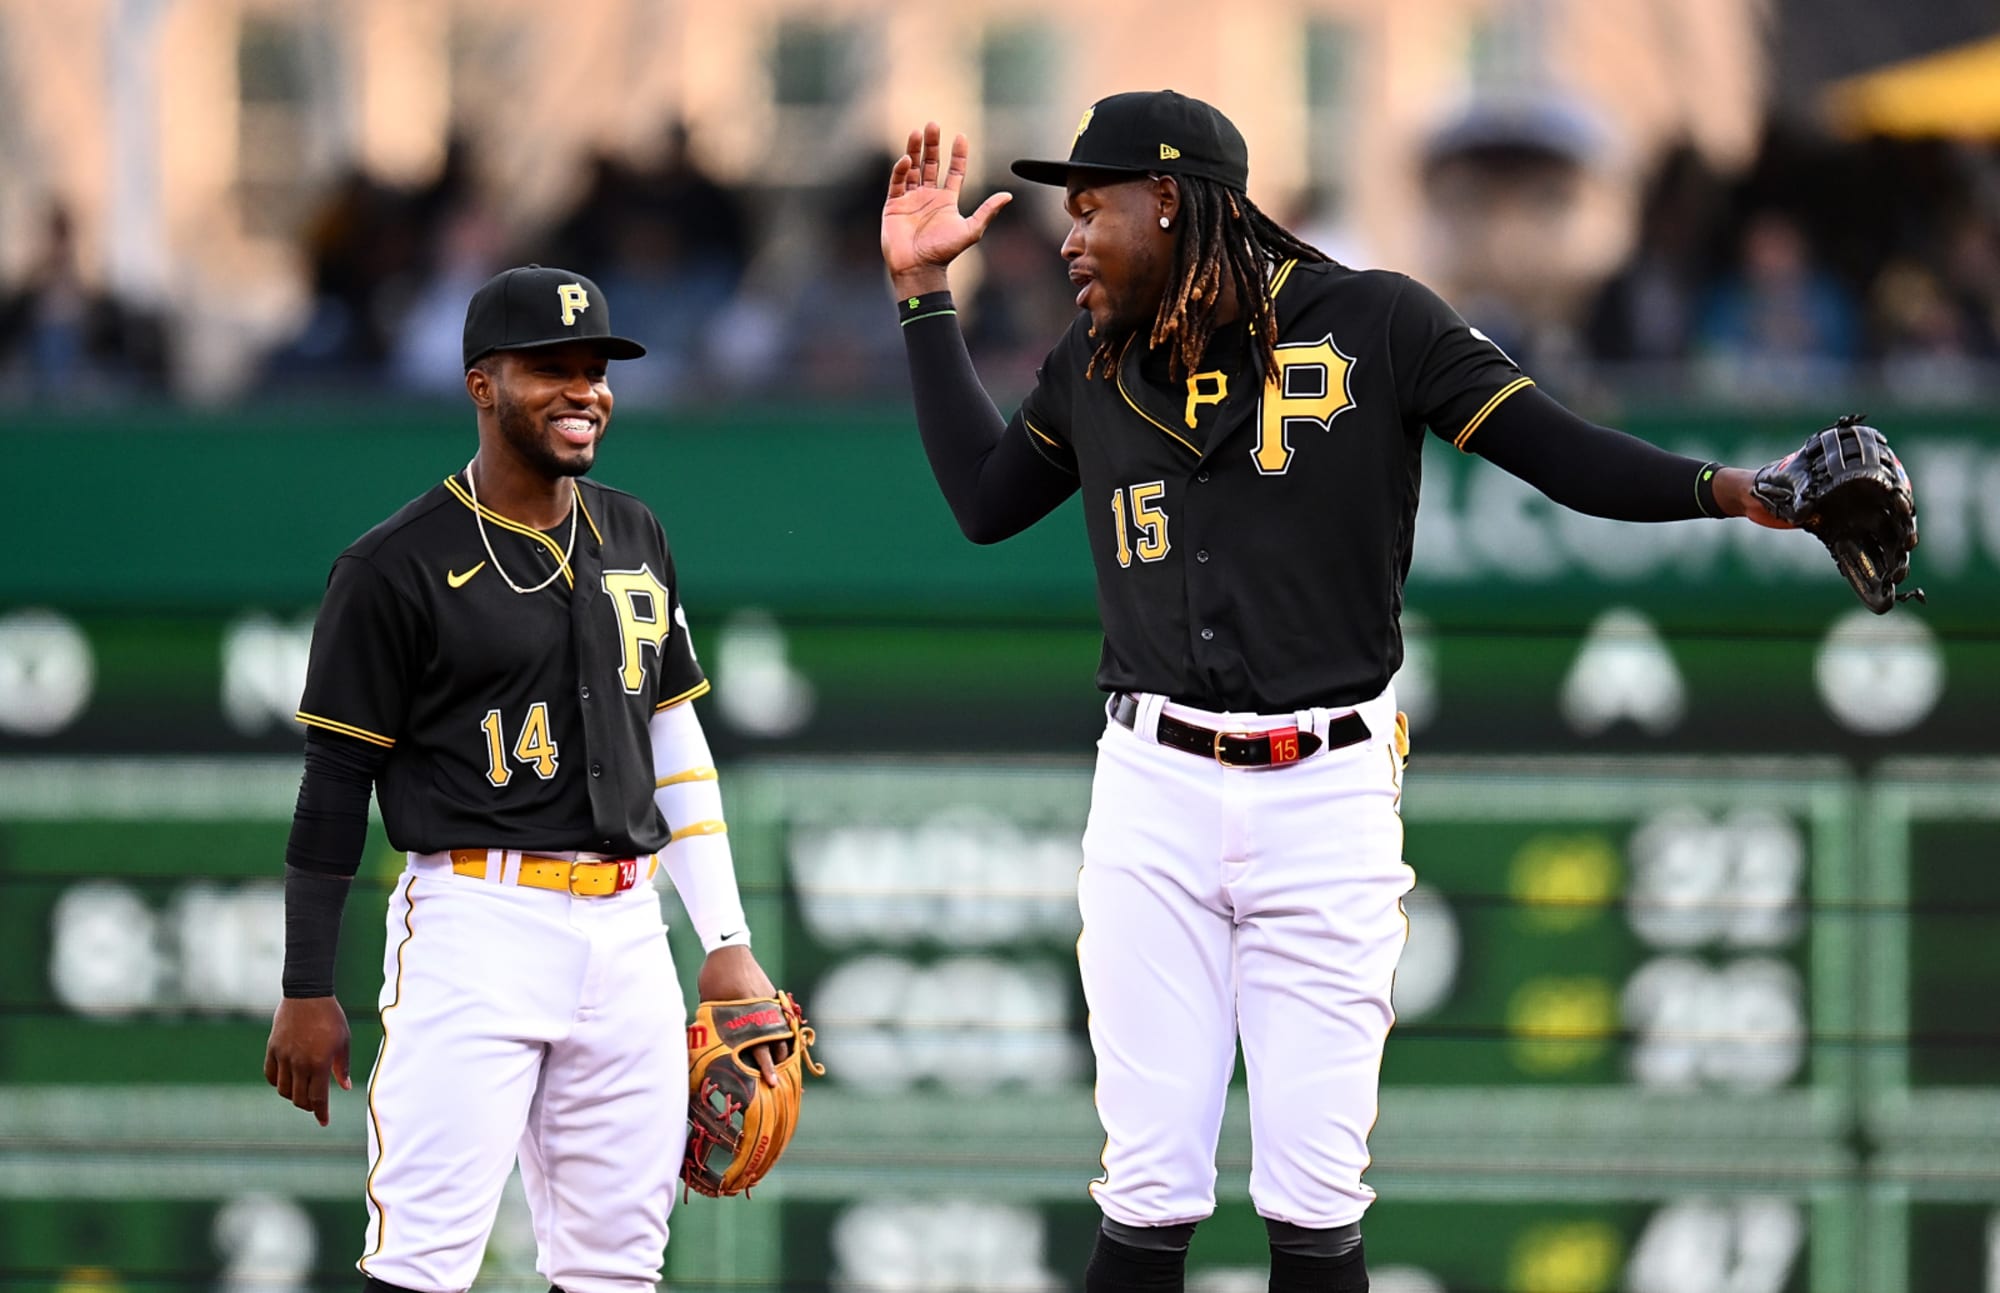 5 fantasy baseball waiver wire replacements for Pirates SS Oneil